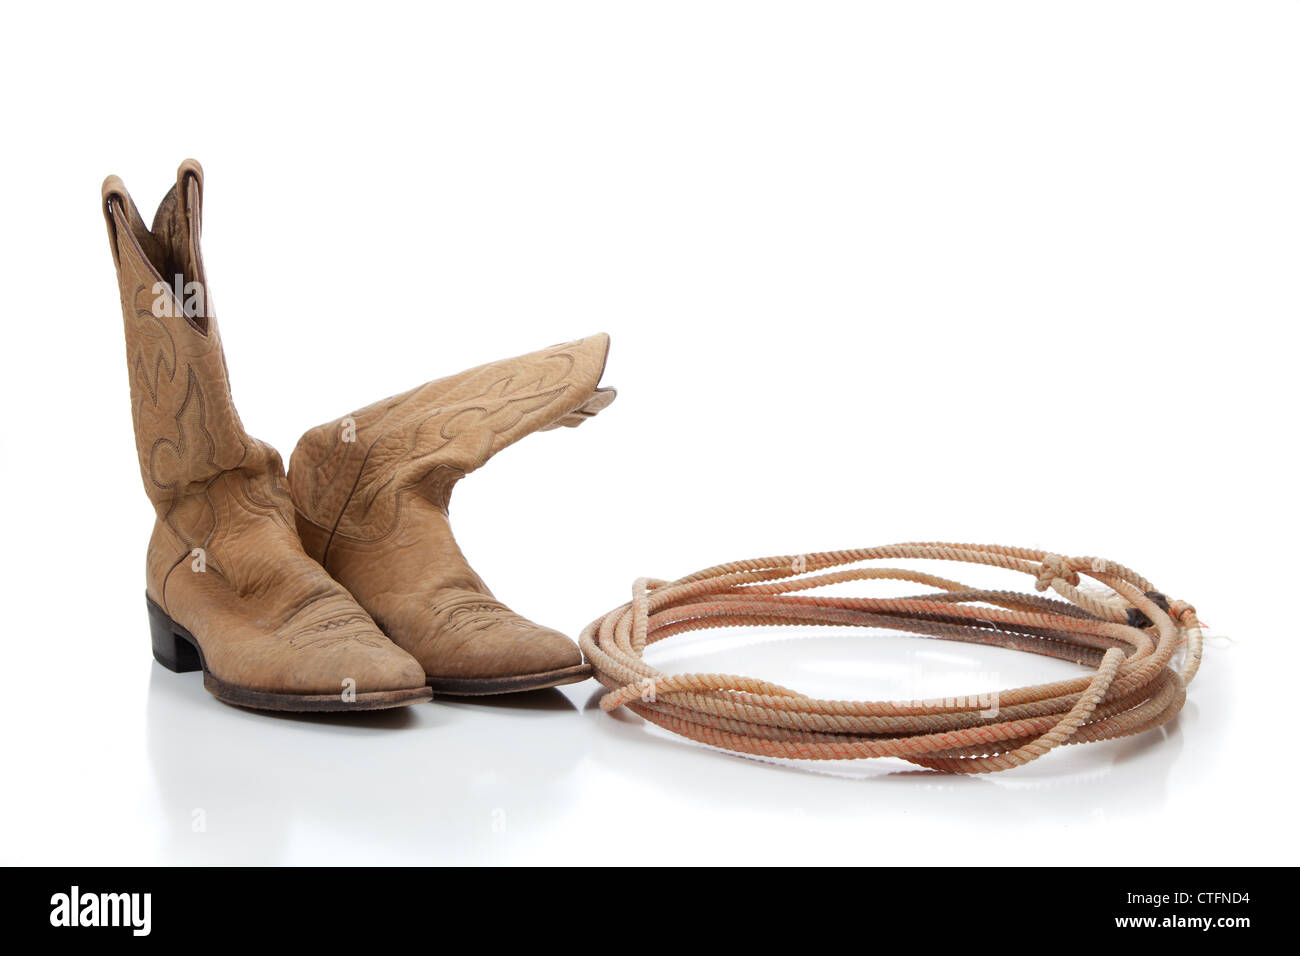 Cowboy boots and lariat rope on white with copy space Stock Photo